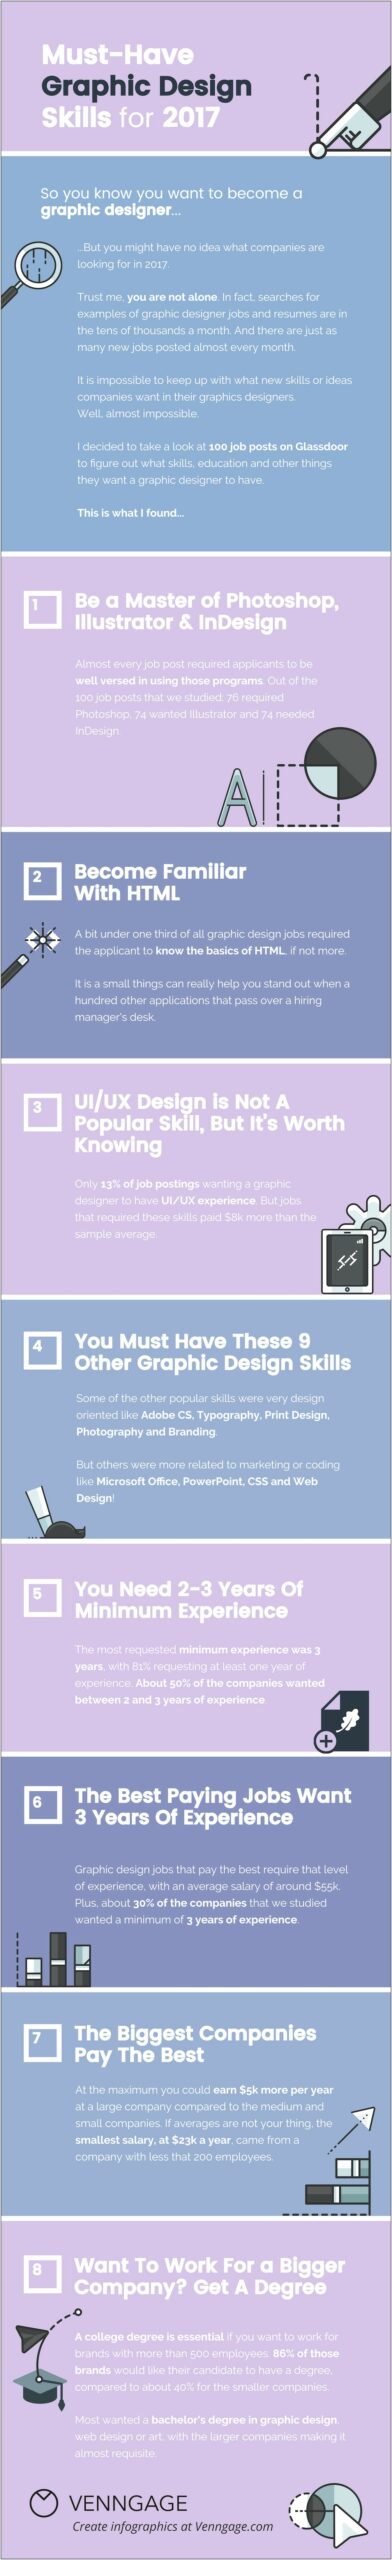 Graphic Design Skills To List On Your Resume